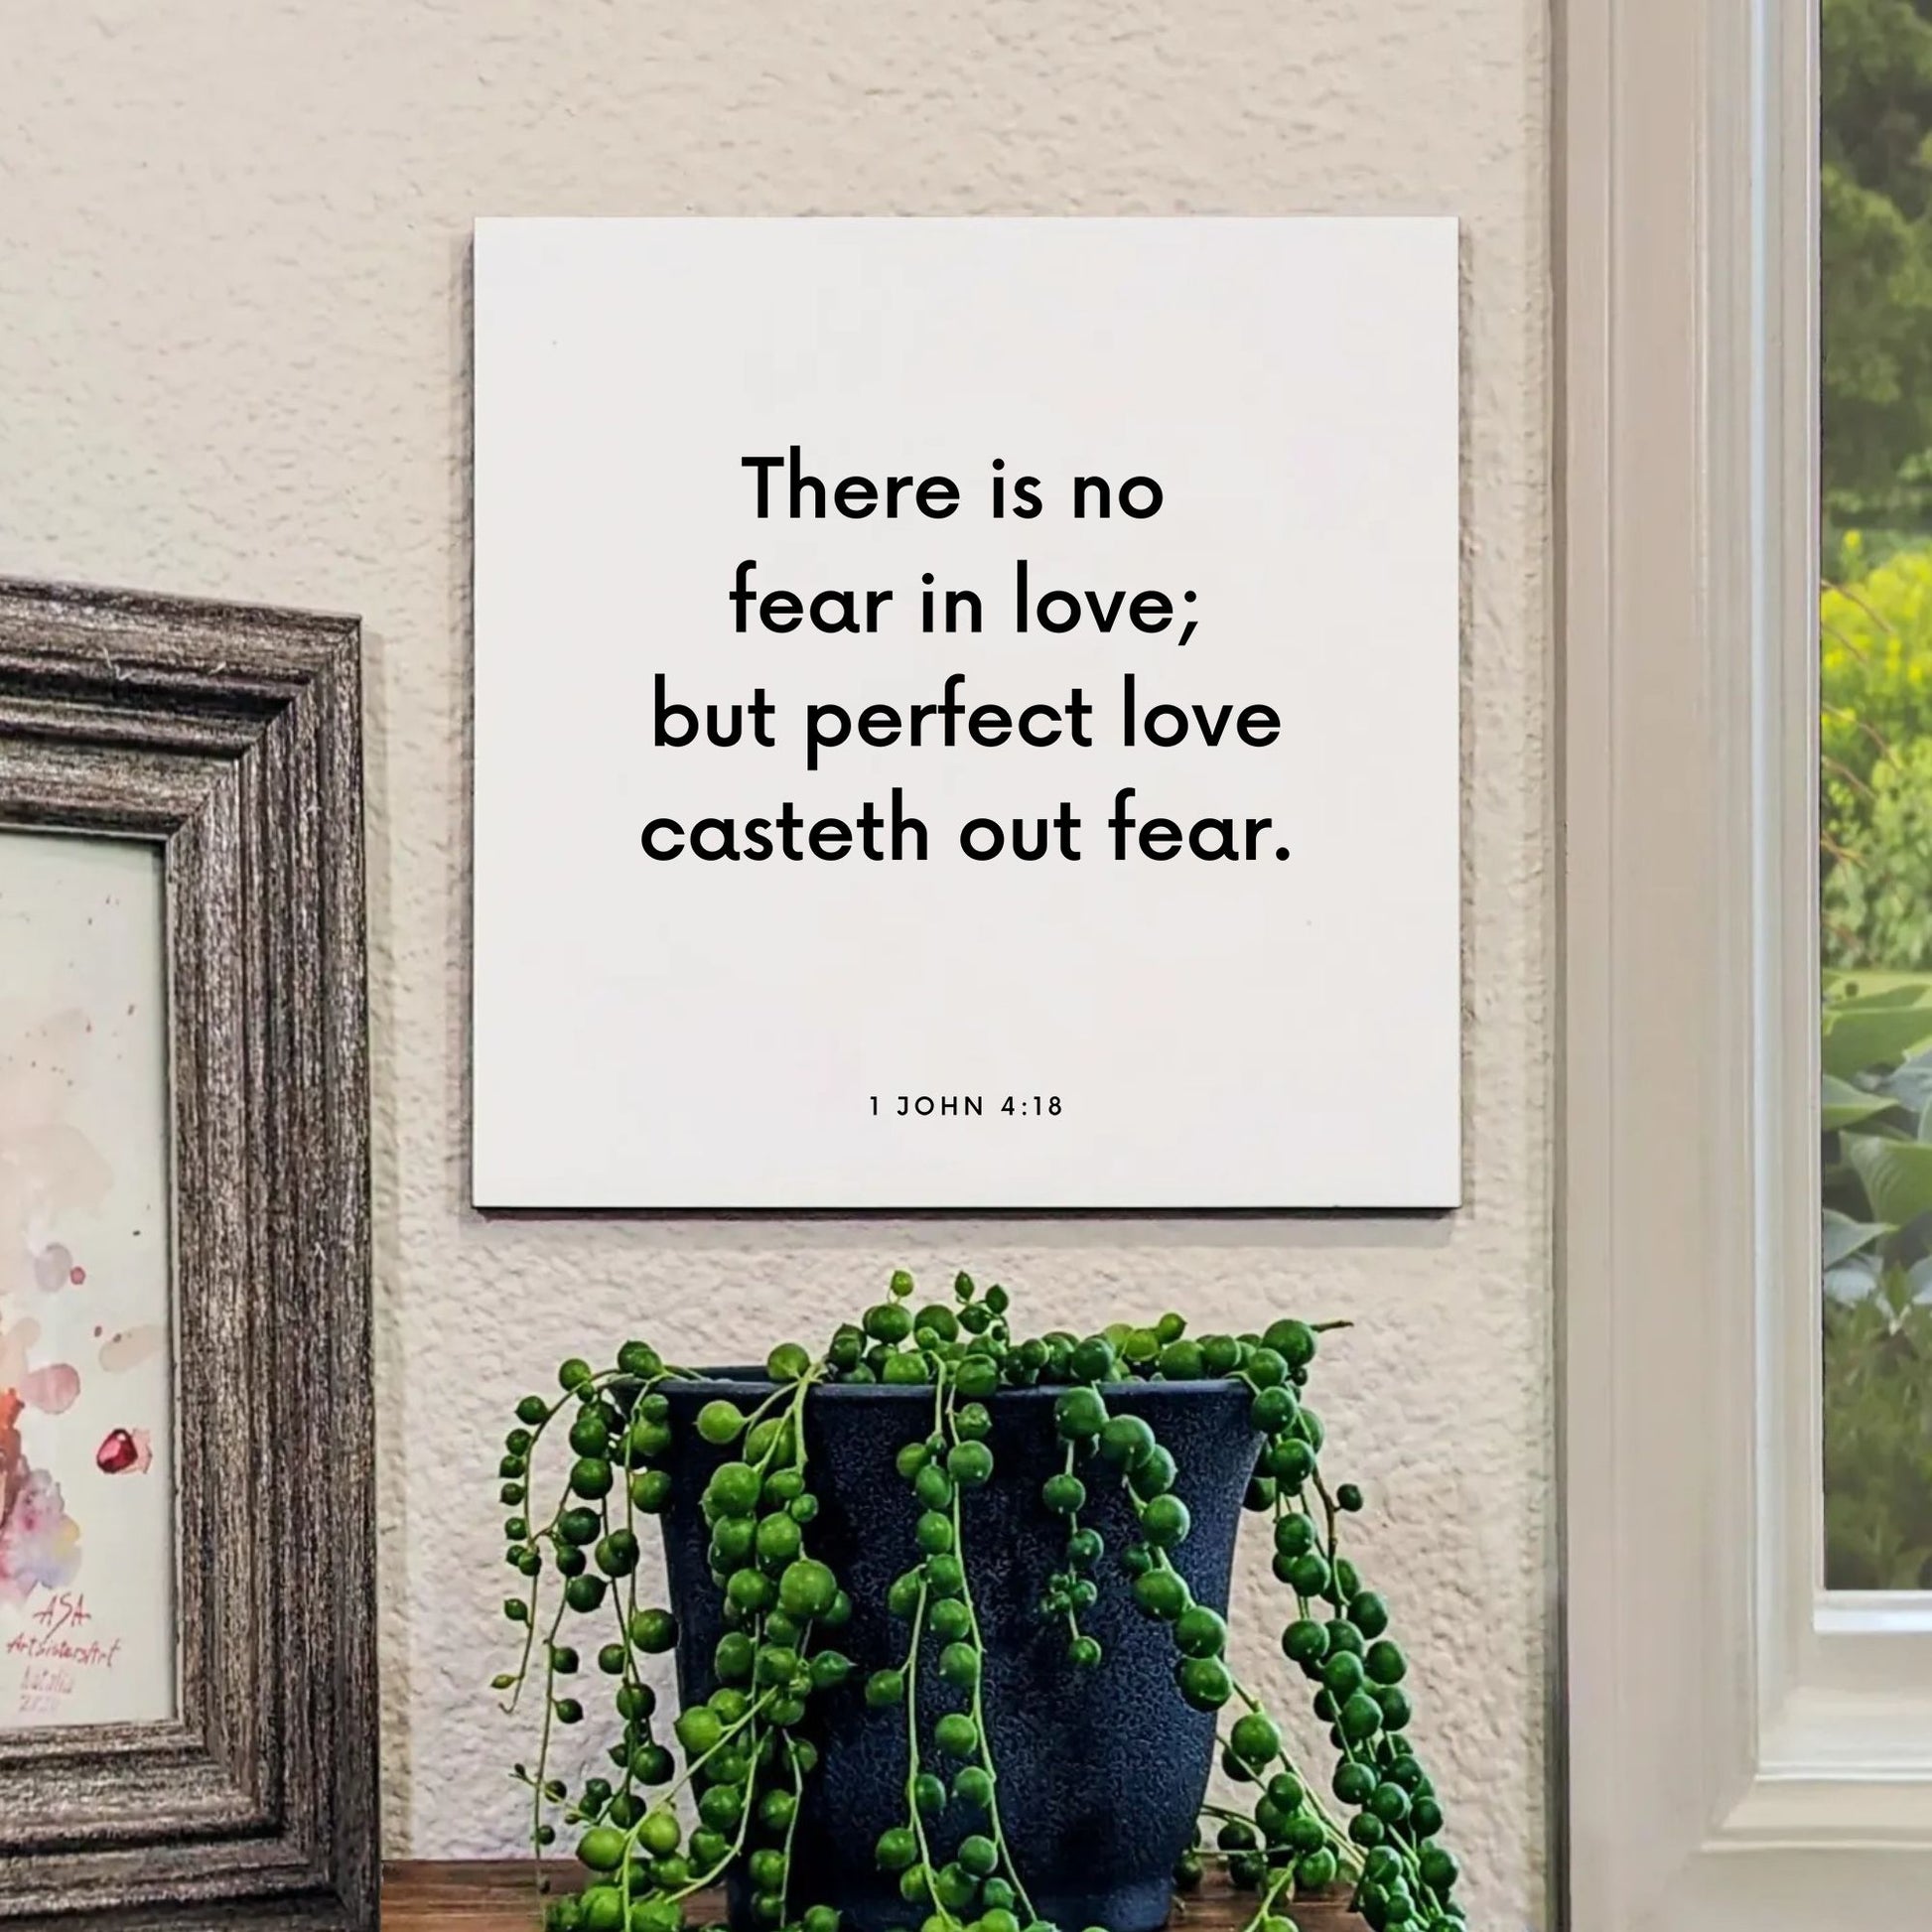 Window mouting of the scripture tile for 1 John 4:18 - "There is no fear in love; but perfect love casteth out fear"